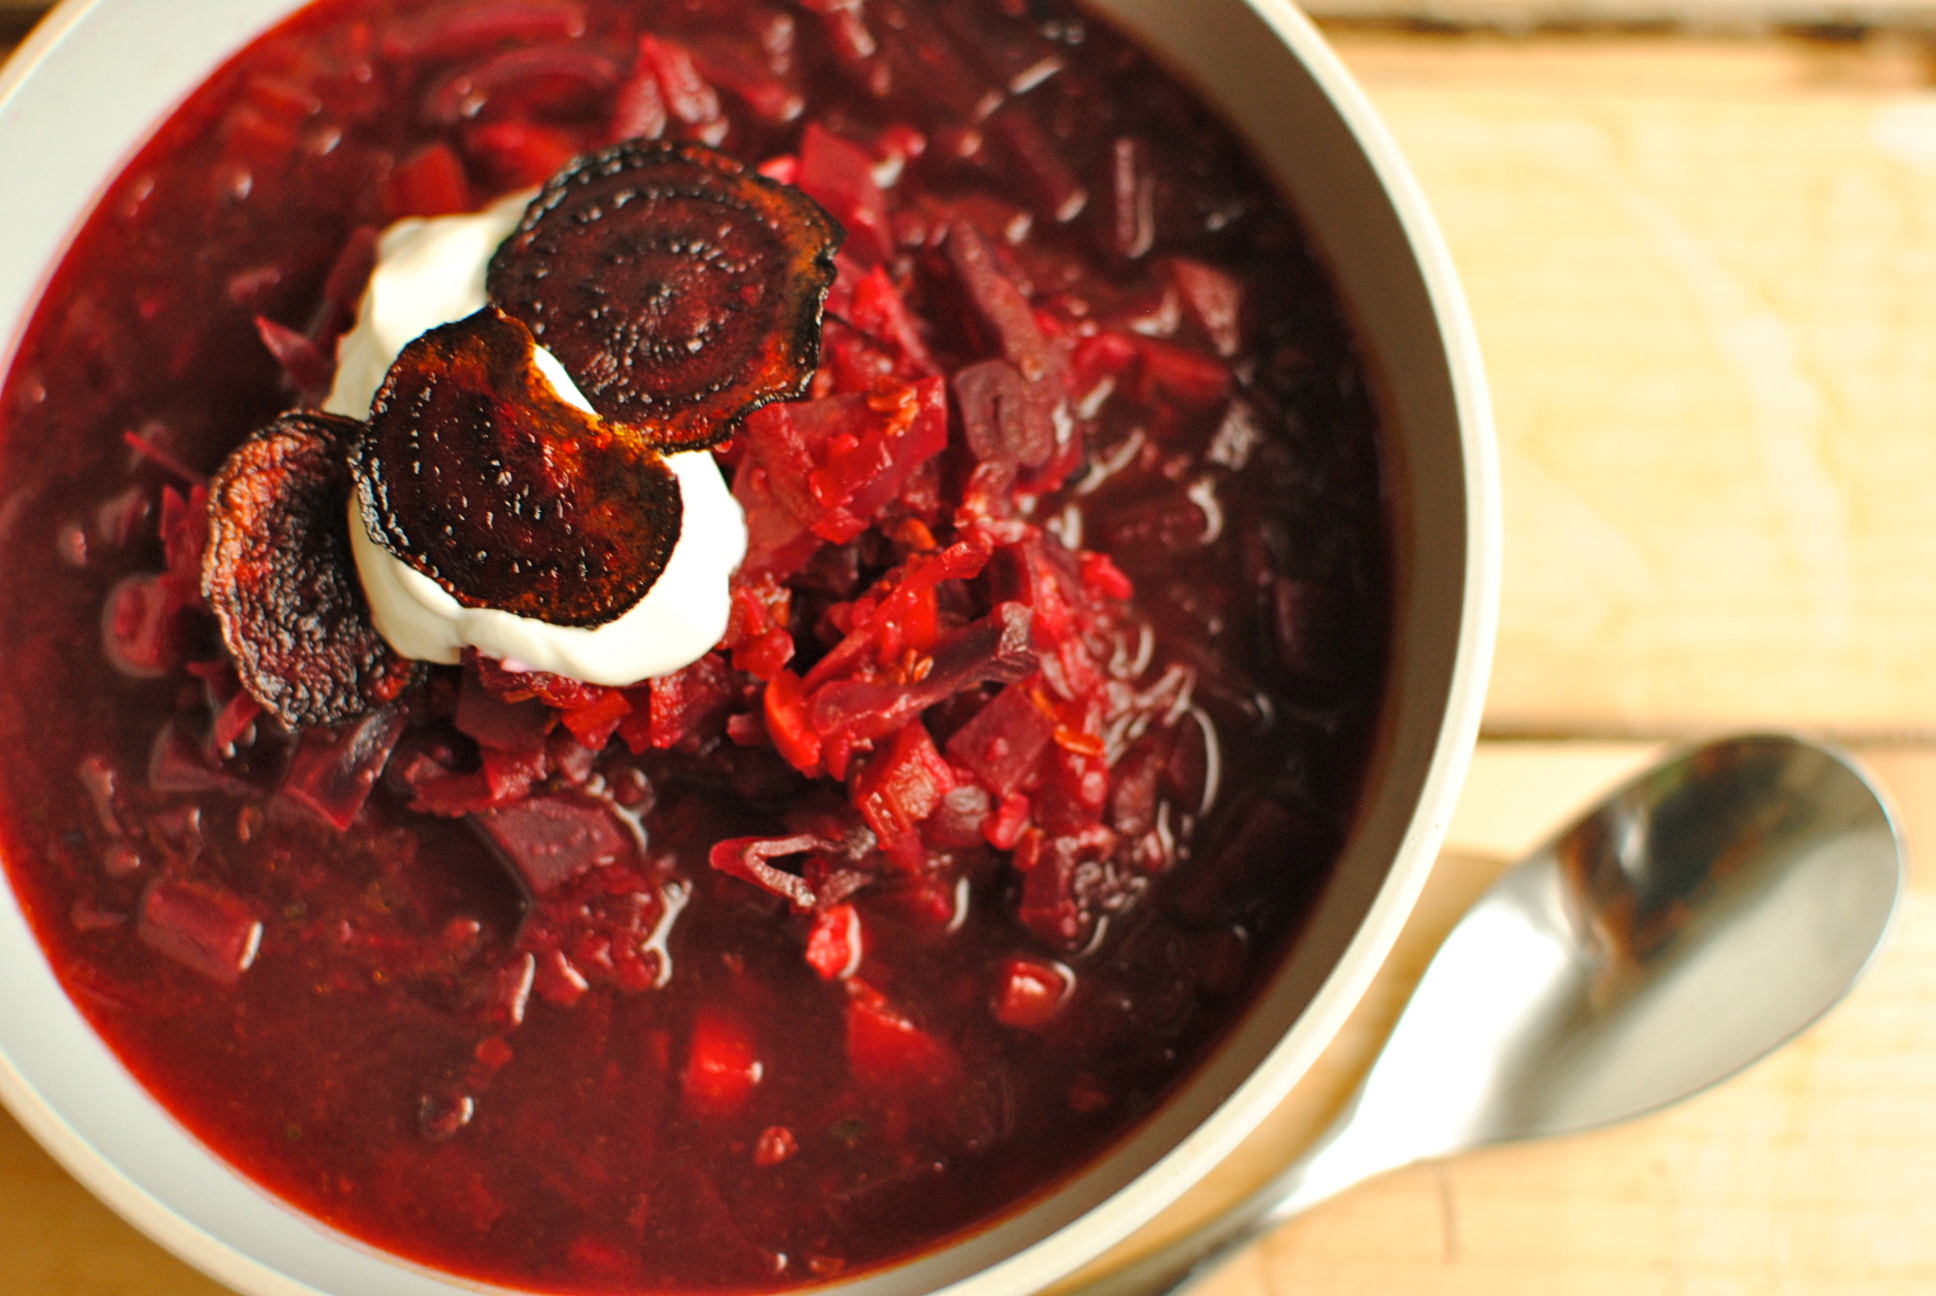 What is a good recipe for borscht soup?